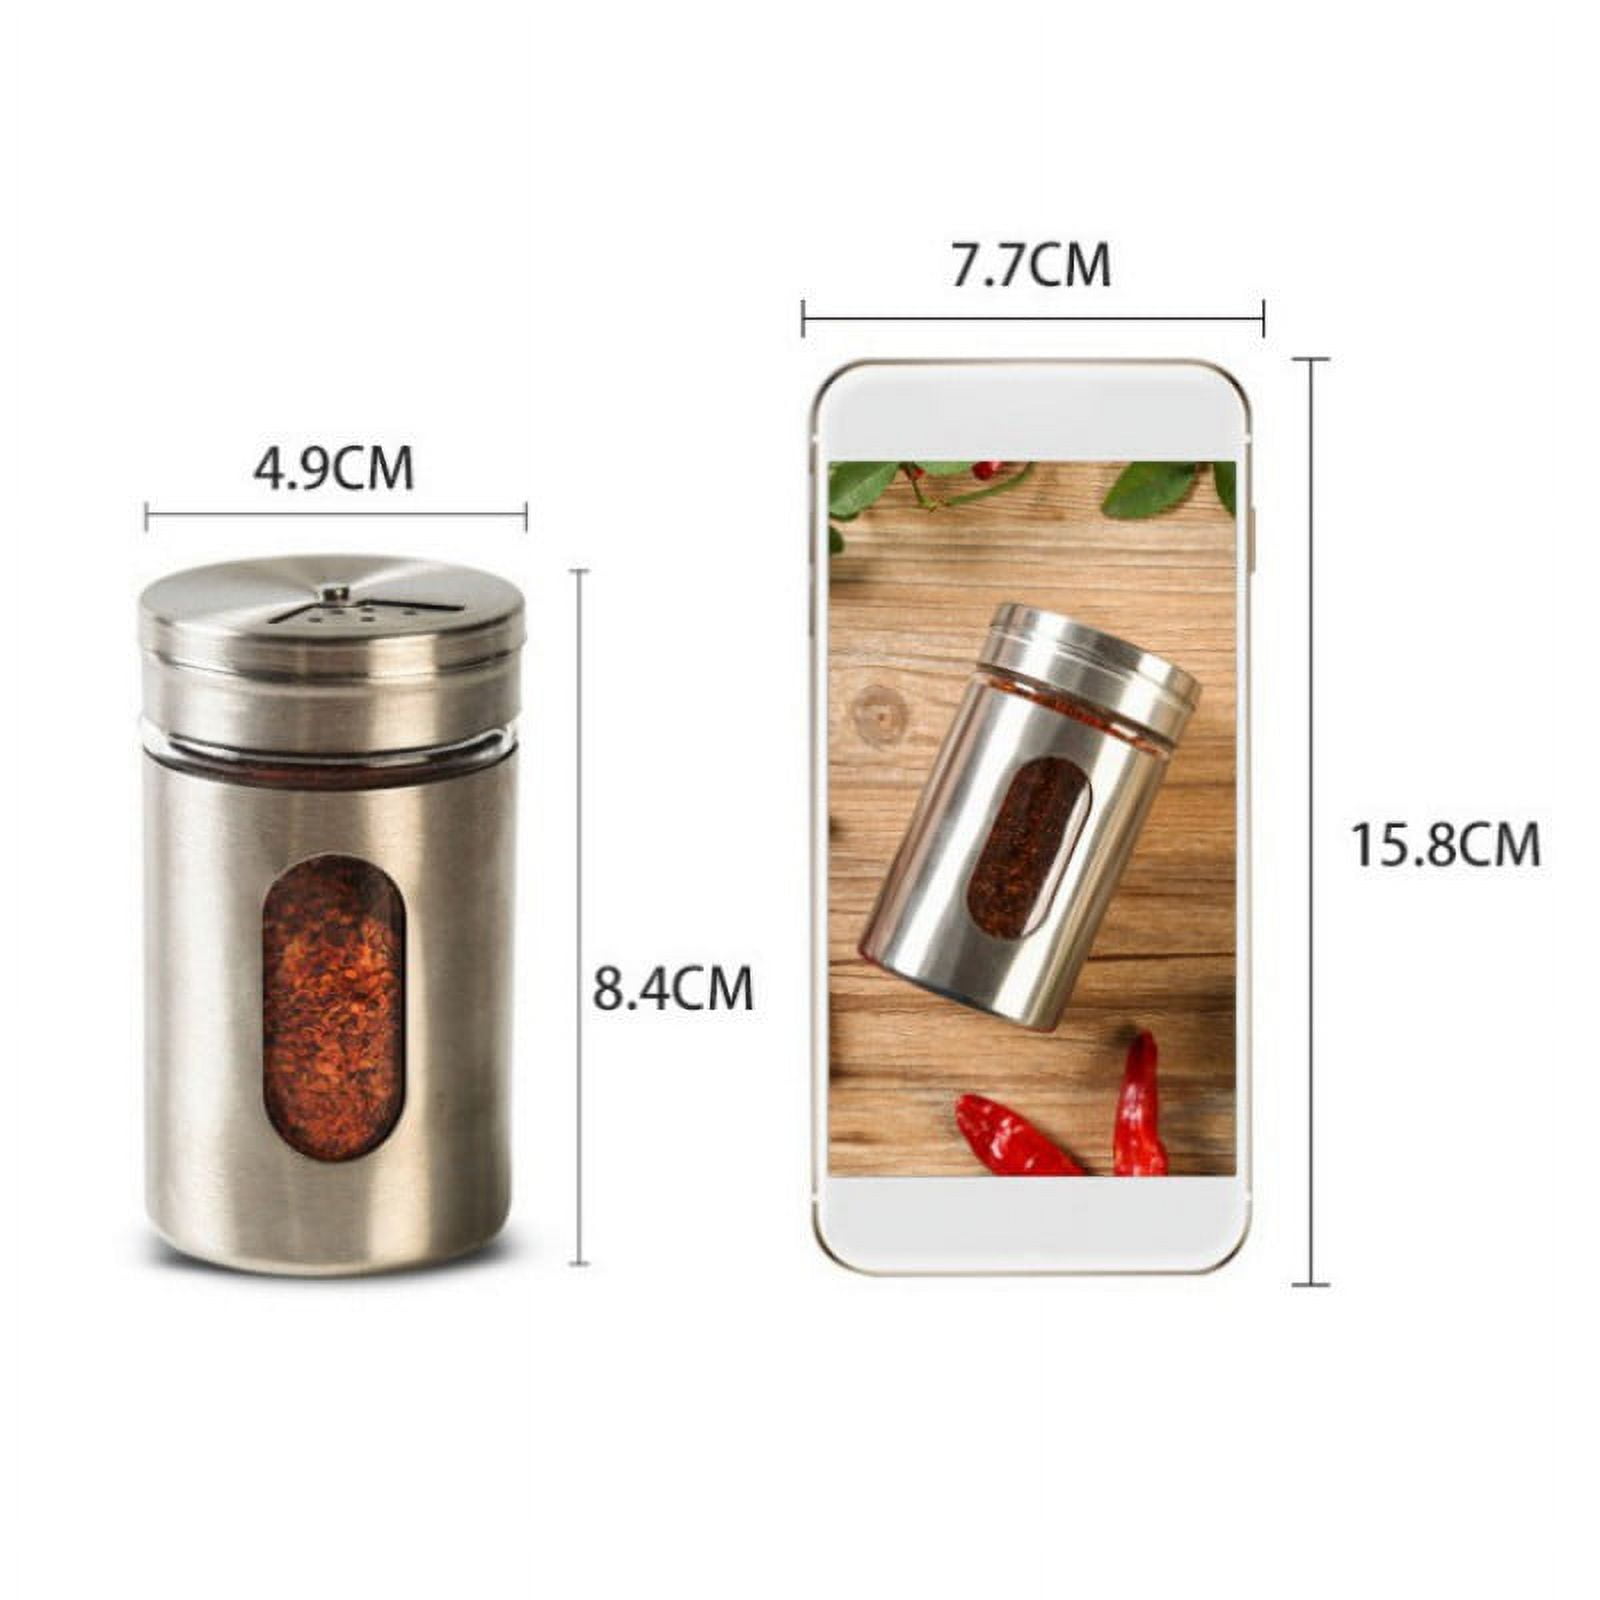 2.7 oz Glass Spice Jar w/ Shaker Lid Stainless Steel, 2 x 2 x 3-1/4 H | The Container Store